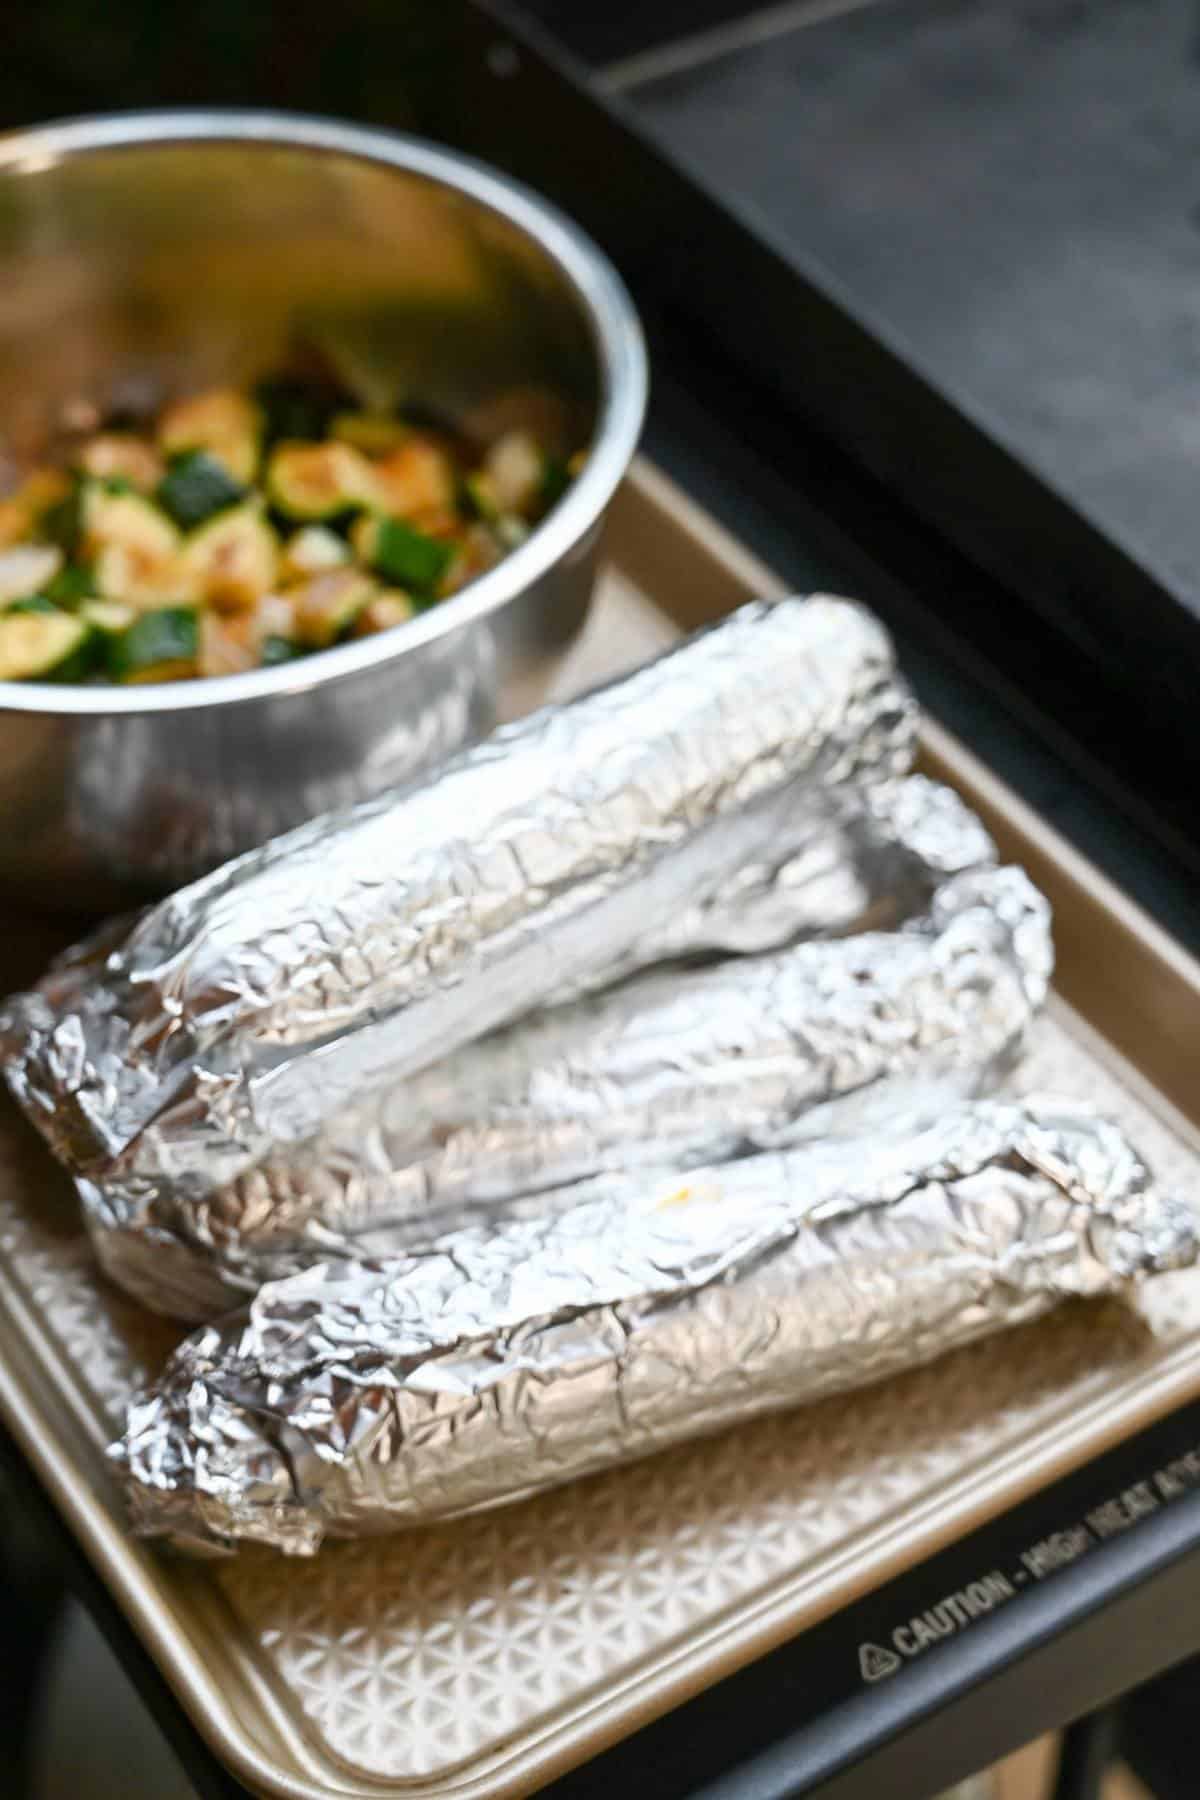 corn rolled up in foil ready to cook